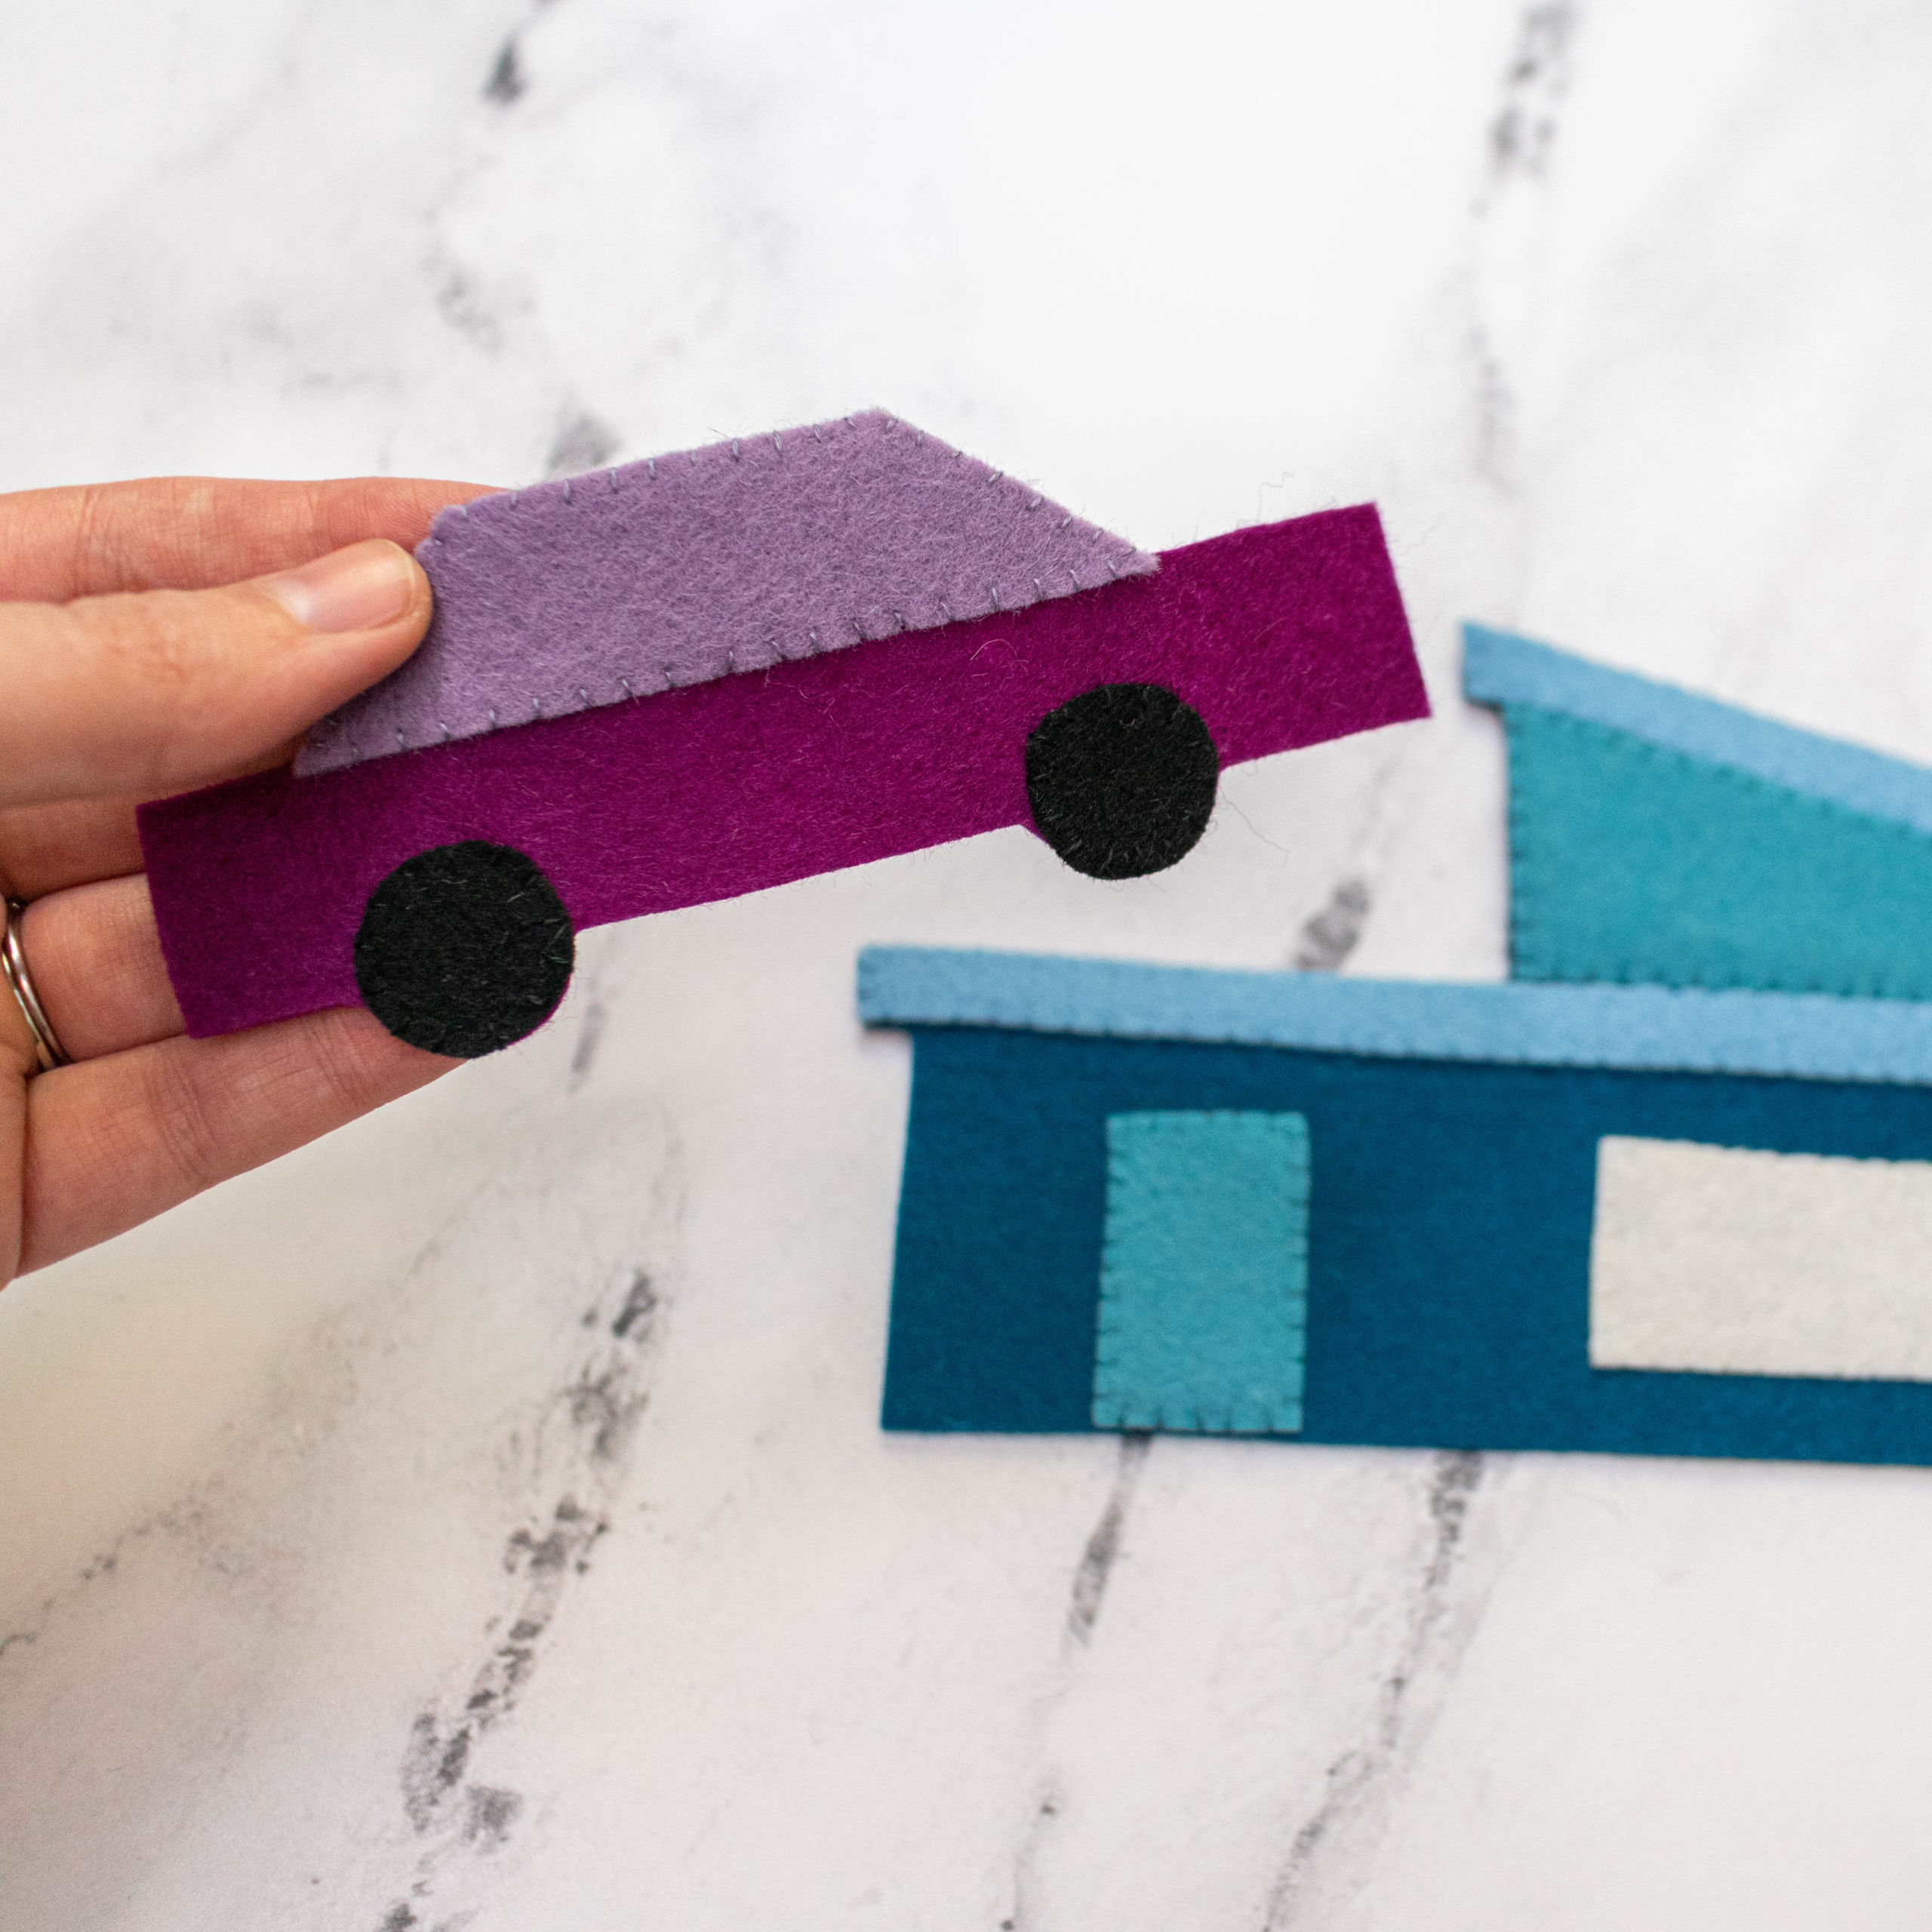 A simple DIY quilted play mat tutorial! Transform a quilt pattern into a toddler play mat for cars. suzyquilts.com #quilt #kidsewing